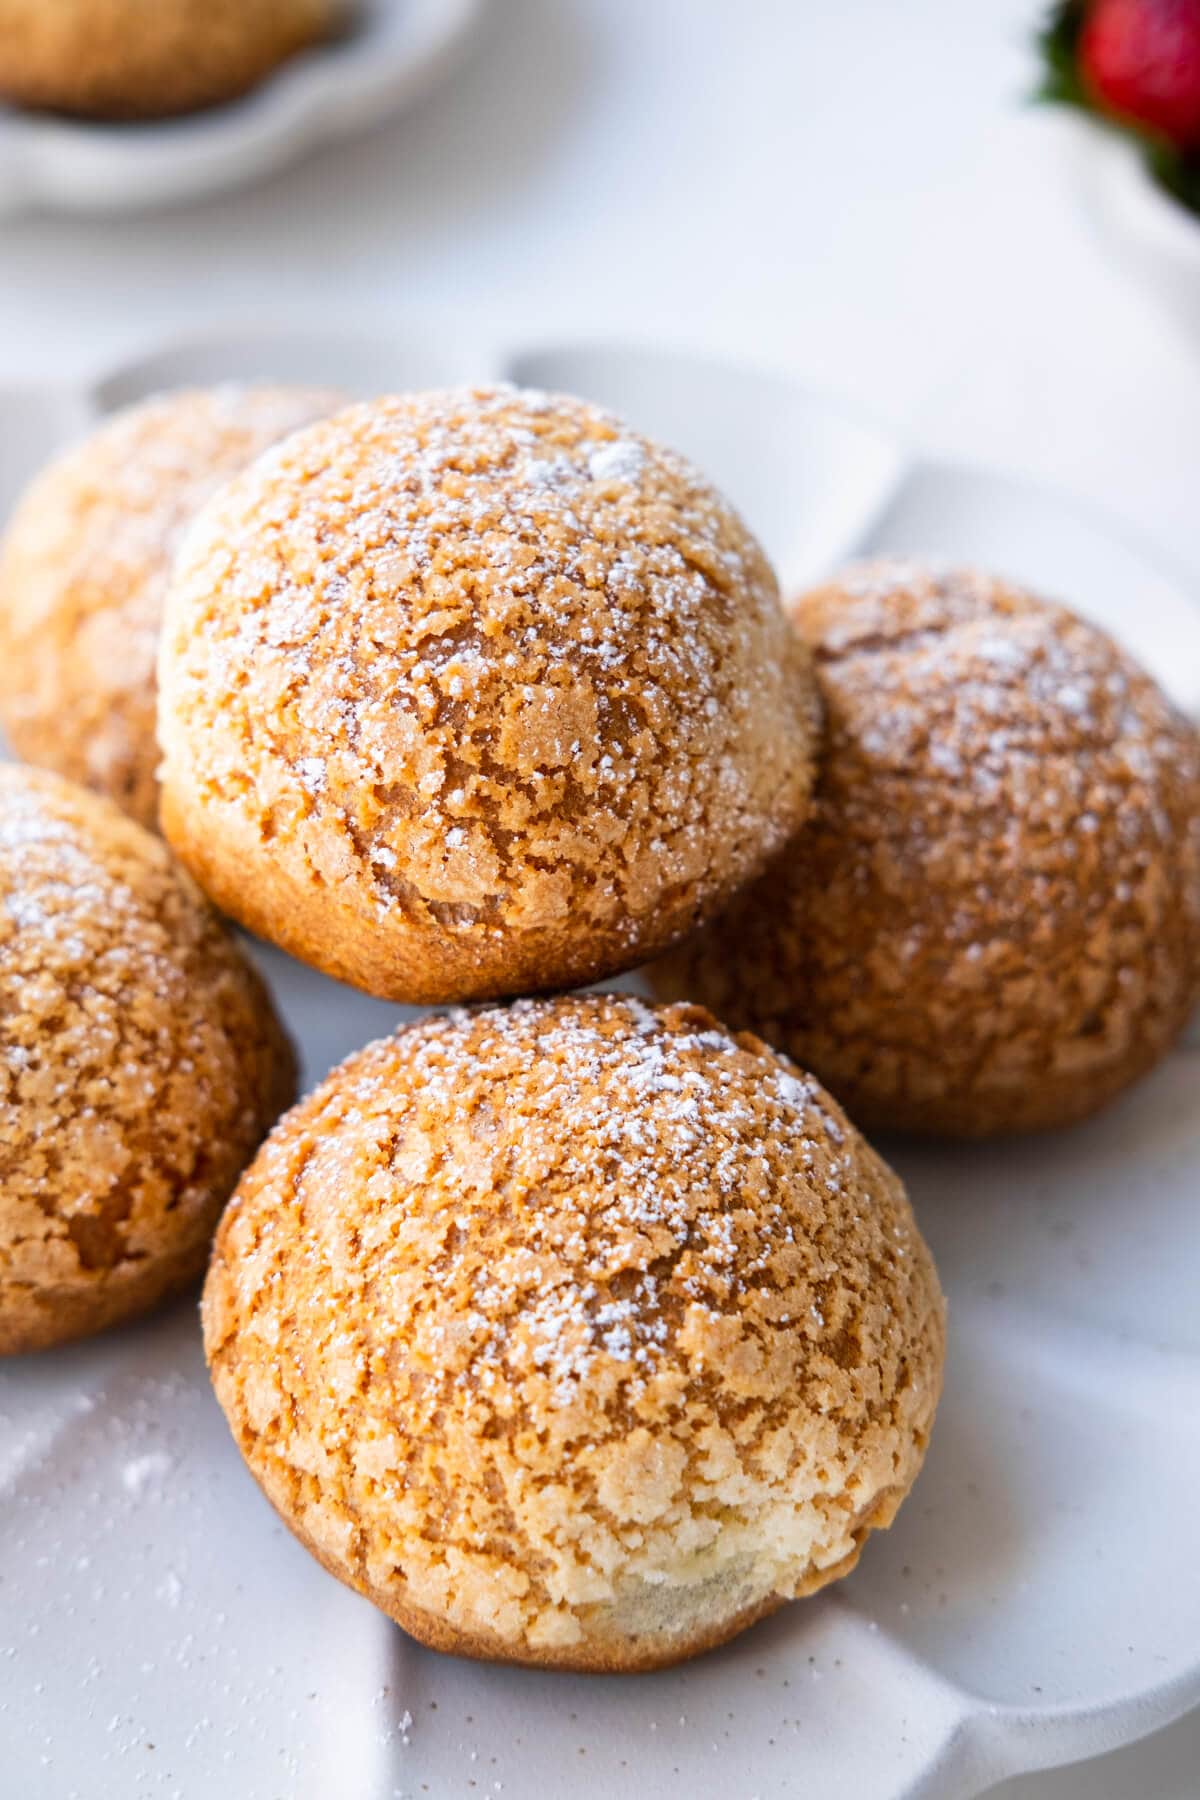 Round crispy golden brown pastry filled with cream and sprinkled with dusting powdered sugar. 